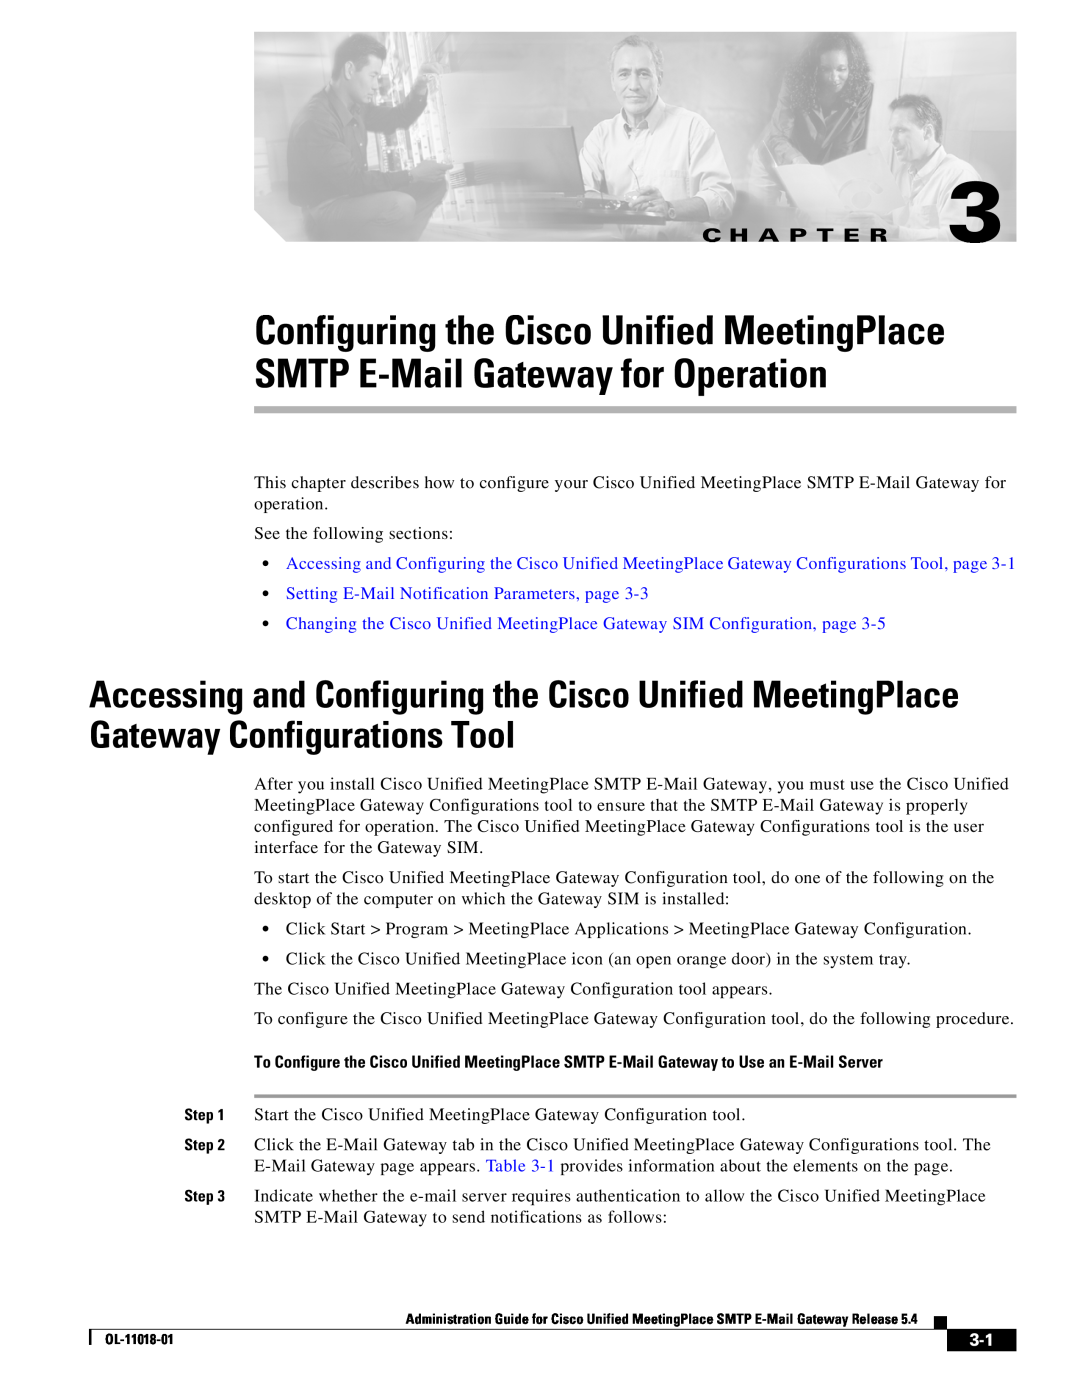 Cisco Systems manual Configuring the Cisco Unified MeetingPlace, SMTP E-Mail Gateway for Operation, C H A P T E R 